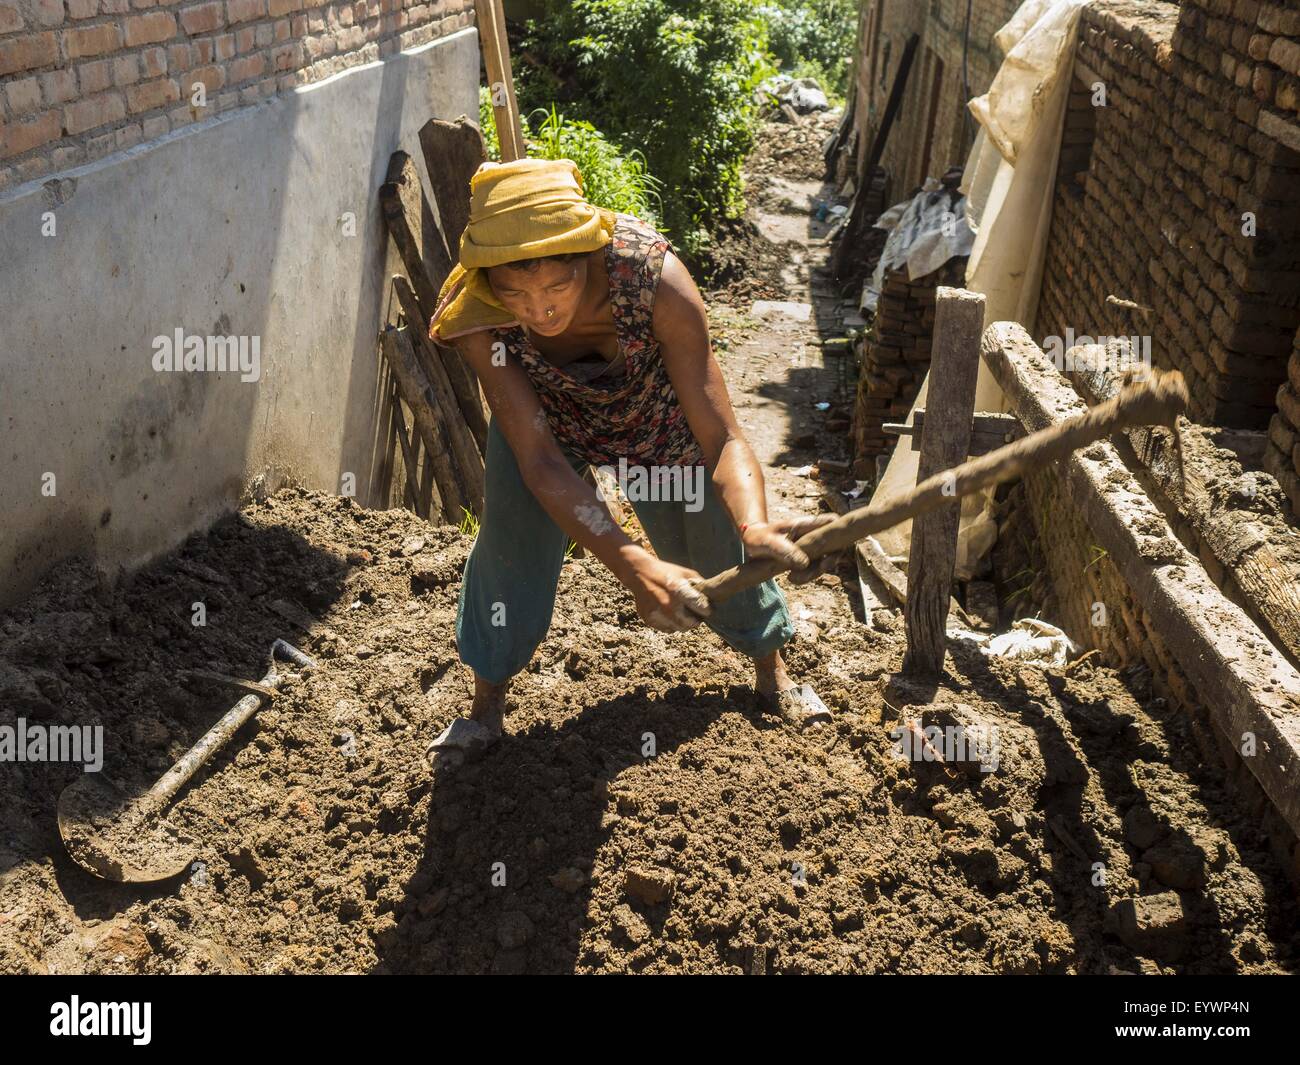 Sankhu, Central Region, Nepal. 3rd Aug, 2015. A woman digs up mud to be used as mortar in the repair of a home destroyed in the earthquake in Sankhu, a community about 90 minutes from central Kathmandu. The Nepal Earthquake on April 25, 2015, (also known as the Gorkha earthquake) killed more than 9,000 people and injured more than 23,000. It had a magnitude of 7.8.  It was the worst natural disaster to strike Nepal since the 1934 Nepal''“Bihar earthquake. © ZUMA Press, Inc./Alamy Live News Stock Photo